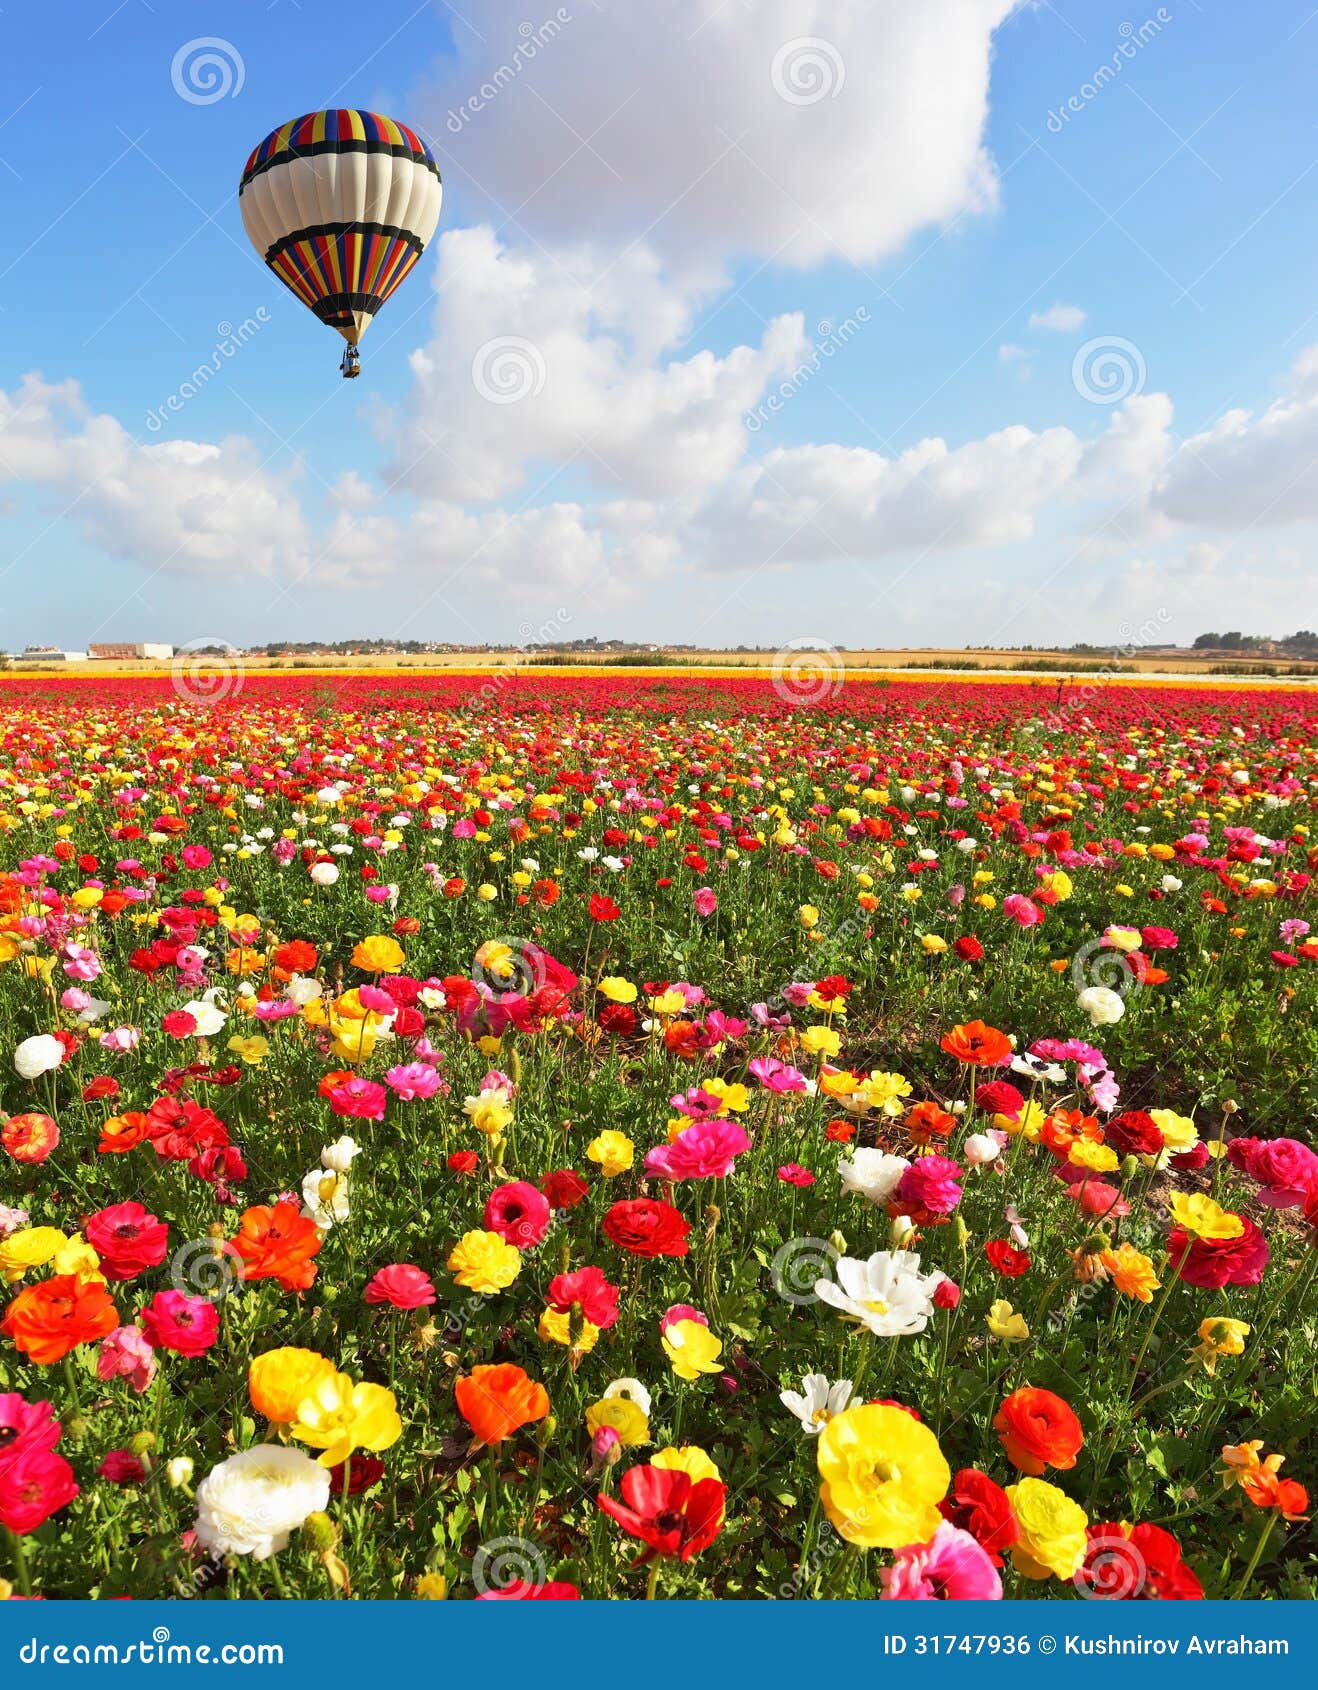 Over the Blossoming Flowers of Flying a Balloon Stock Photo - Image of ...